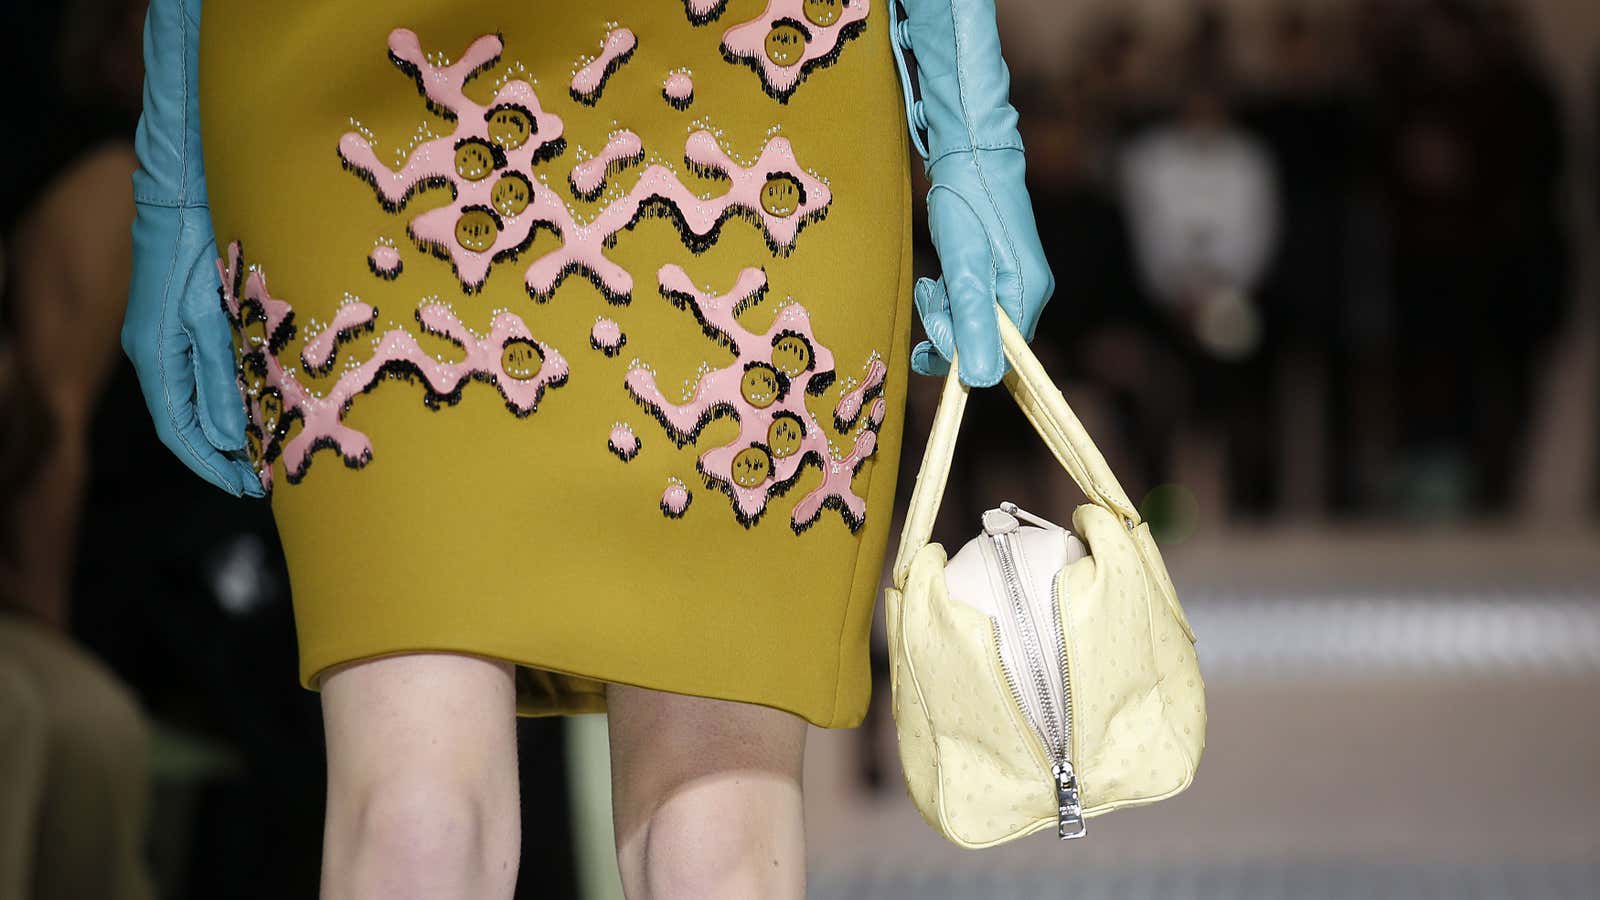 Prada is losing its allure in China.